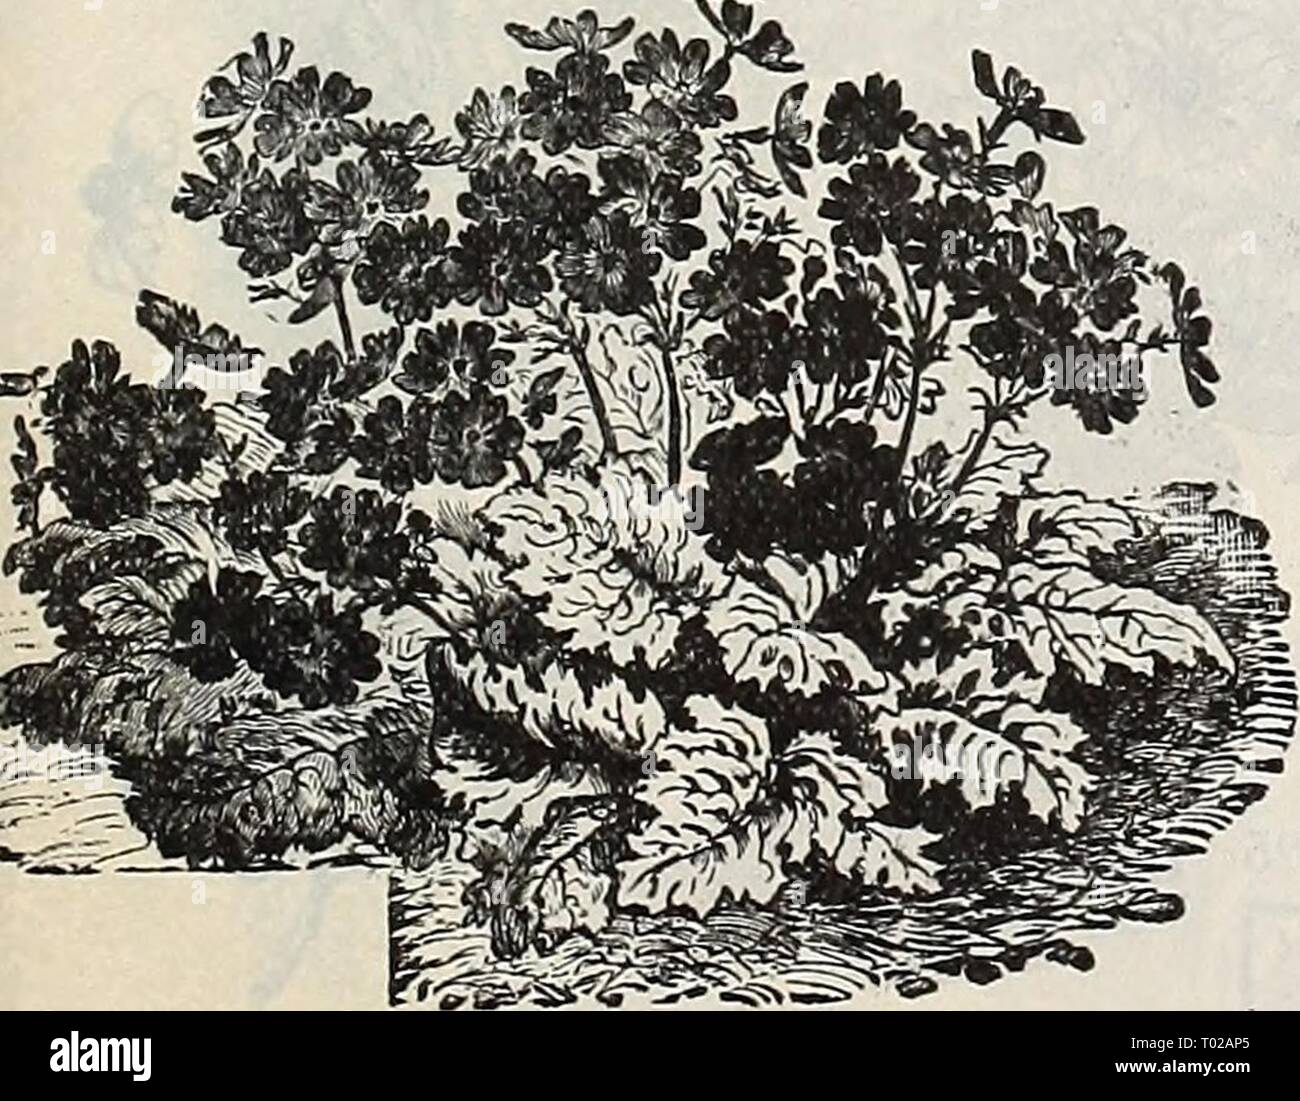 Dreer's garden calendar : 1900 . dreersgardencale1900henr Year: 1900  50 3790 50 3791 3800 R o b u s t a Graiidi- flora. An extra strong growing strain producing enormous trusses of extra large finely fringed flowers ; mixed colors Fern-Leaved. Finest Mixed 25 Dreer's Choicest Mixed. This mixture contains nothing but the finest sorts and cannot fail to give entire satisfaction. (See cut.) 25 DOUBEE-FRINGED CHINESE PRIMROSE. The following Double-hinged Chinese Primroses are very fine and can be highly recommended, 3808 Alba. Double white... . 50 3810 Double Mixed. A 11 colors 50 Primula Obconic Stock Photo